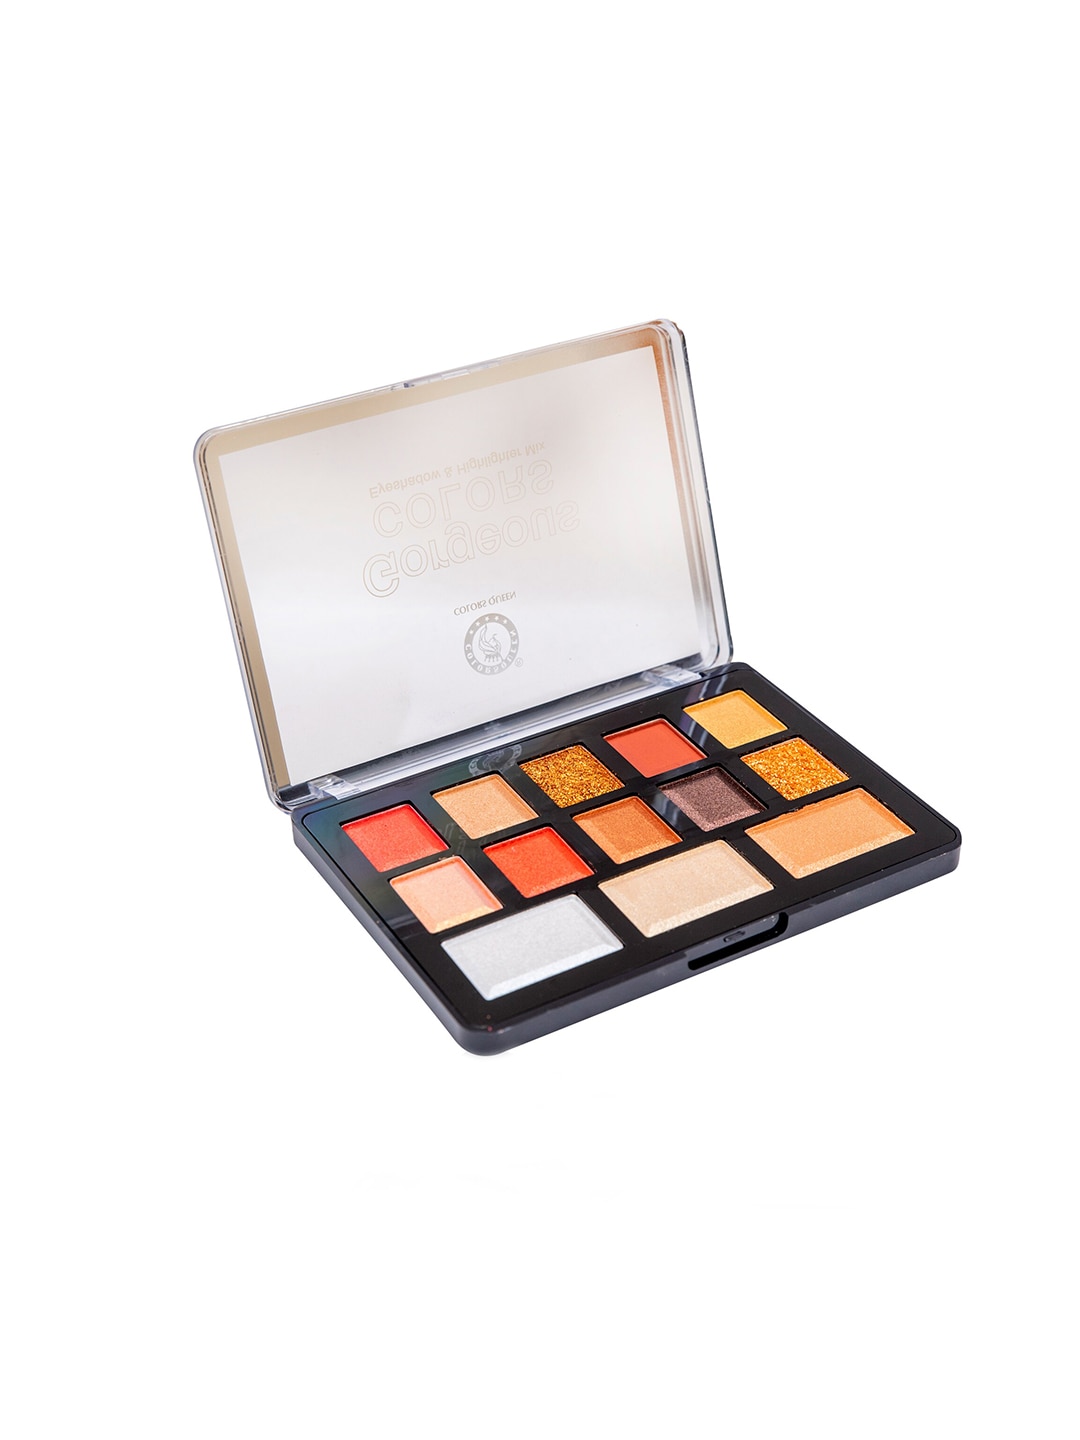 Colors Queen Gorgeous Eyeshadow Palette 24g Price in India